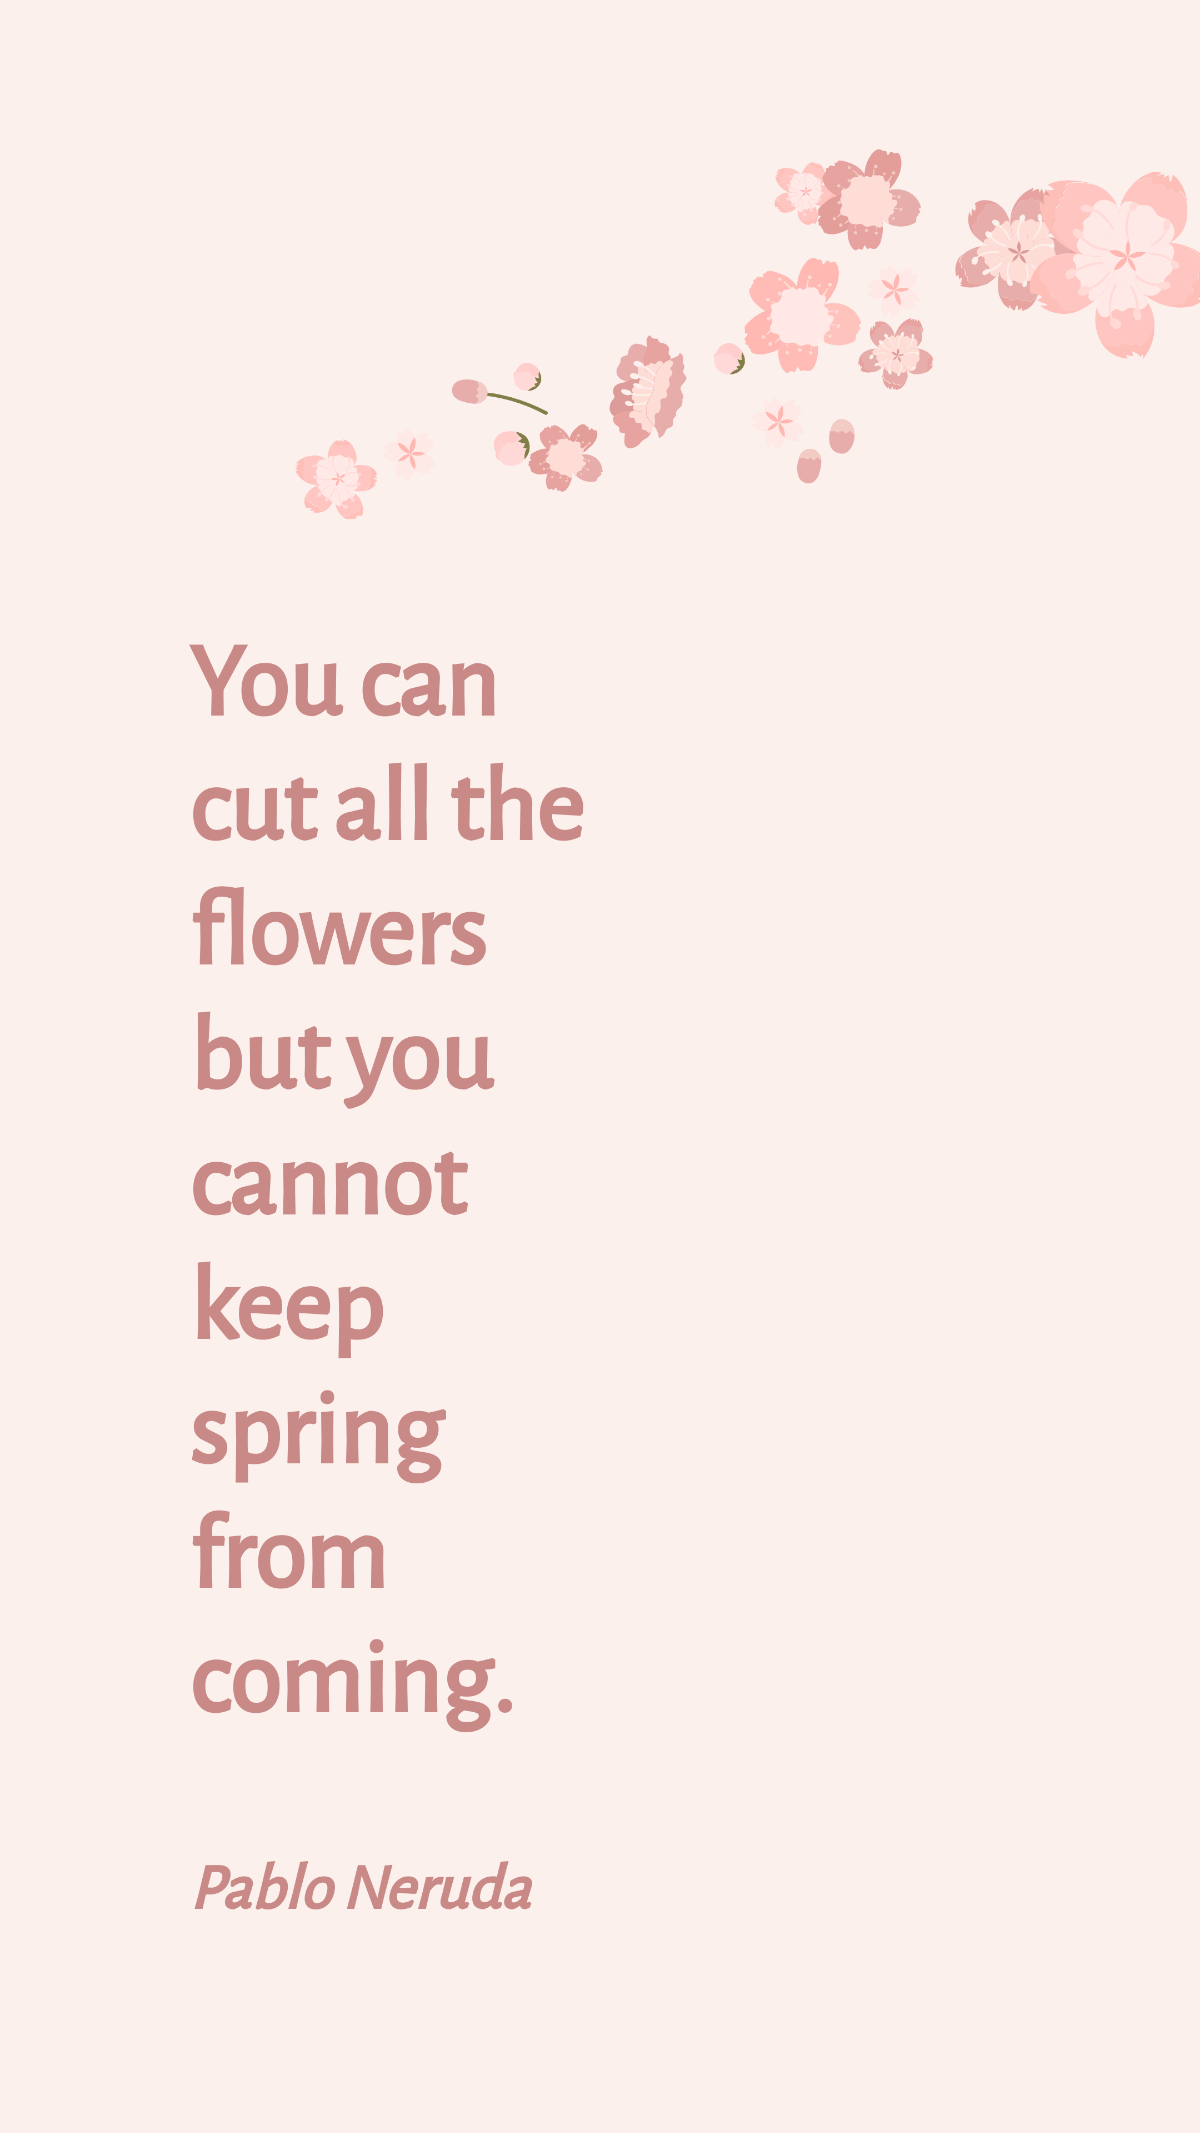 Pablo Neruda - You can cut all the flowers but you cannot keep spring from coming.